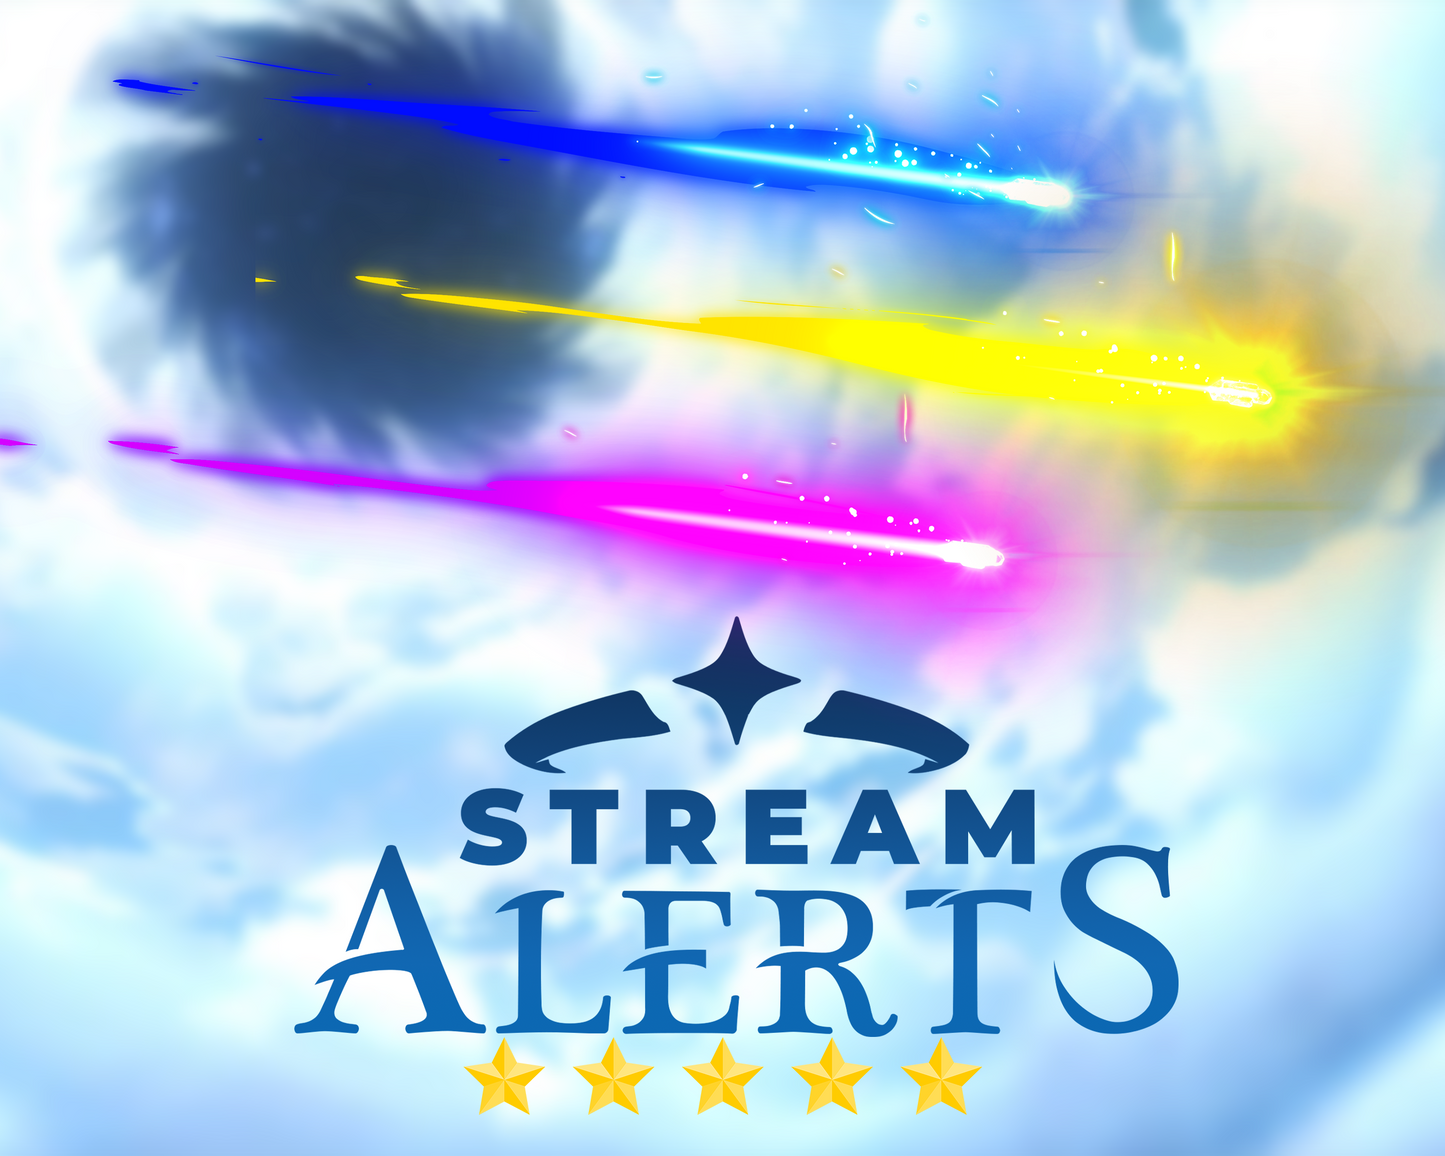 Genshin Impact Wish Alerts Pack for Twitch Streams, Animated Comet Alert Overlay, Follower Subscriber Cheer Raid Donation Gift, 3 Colors